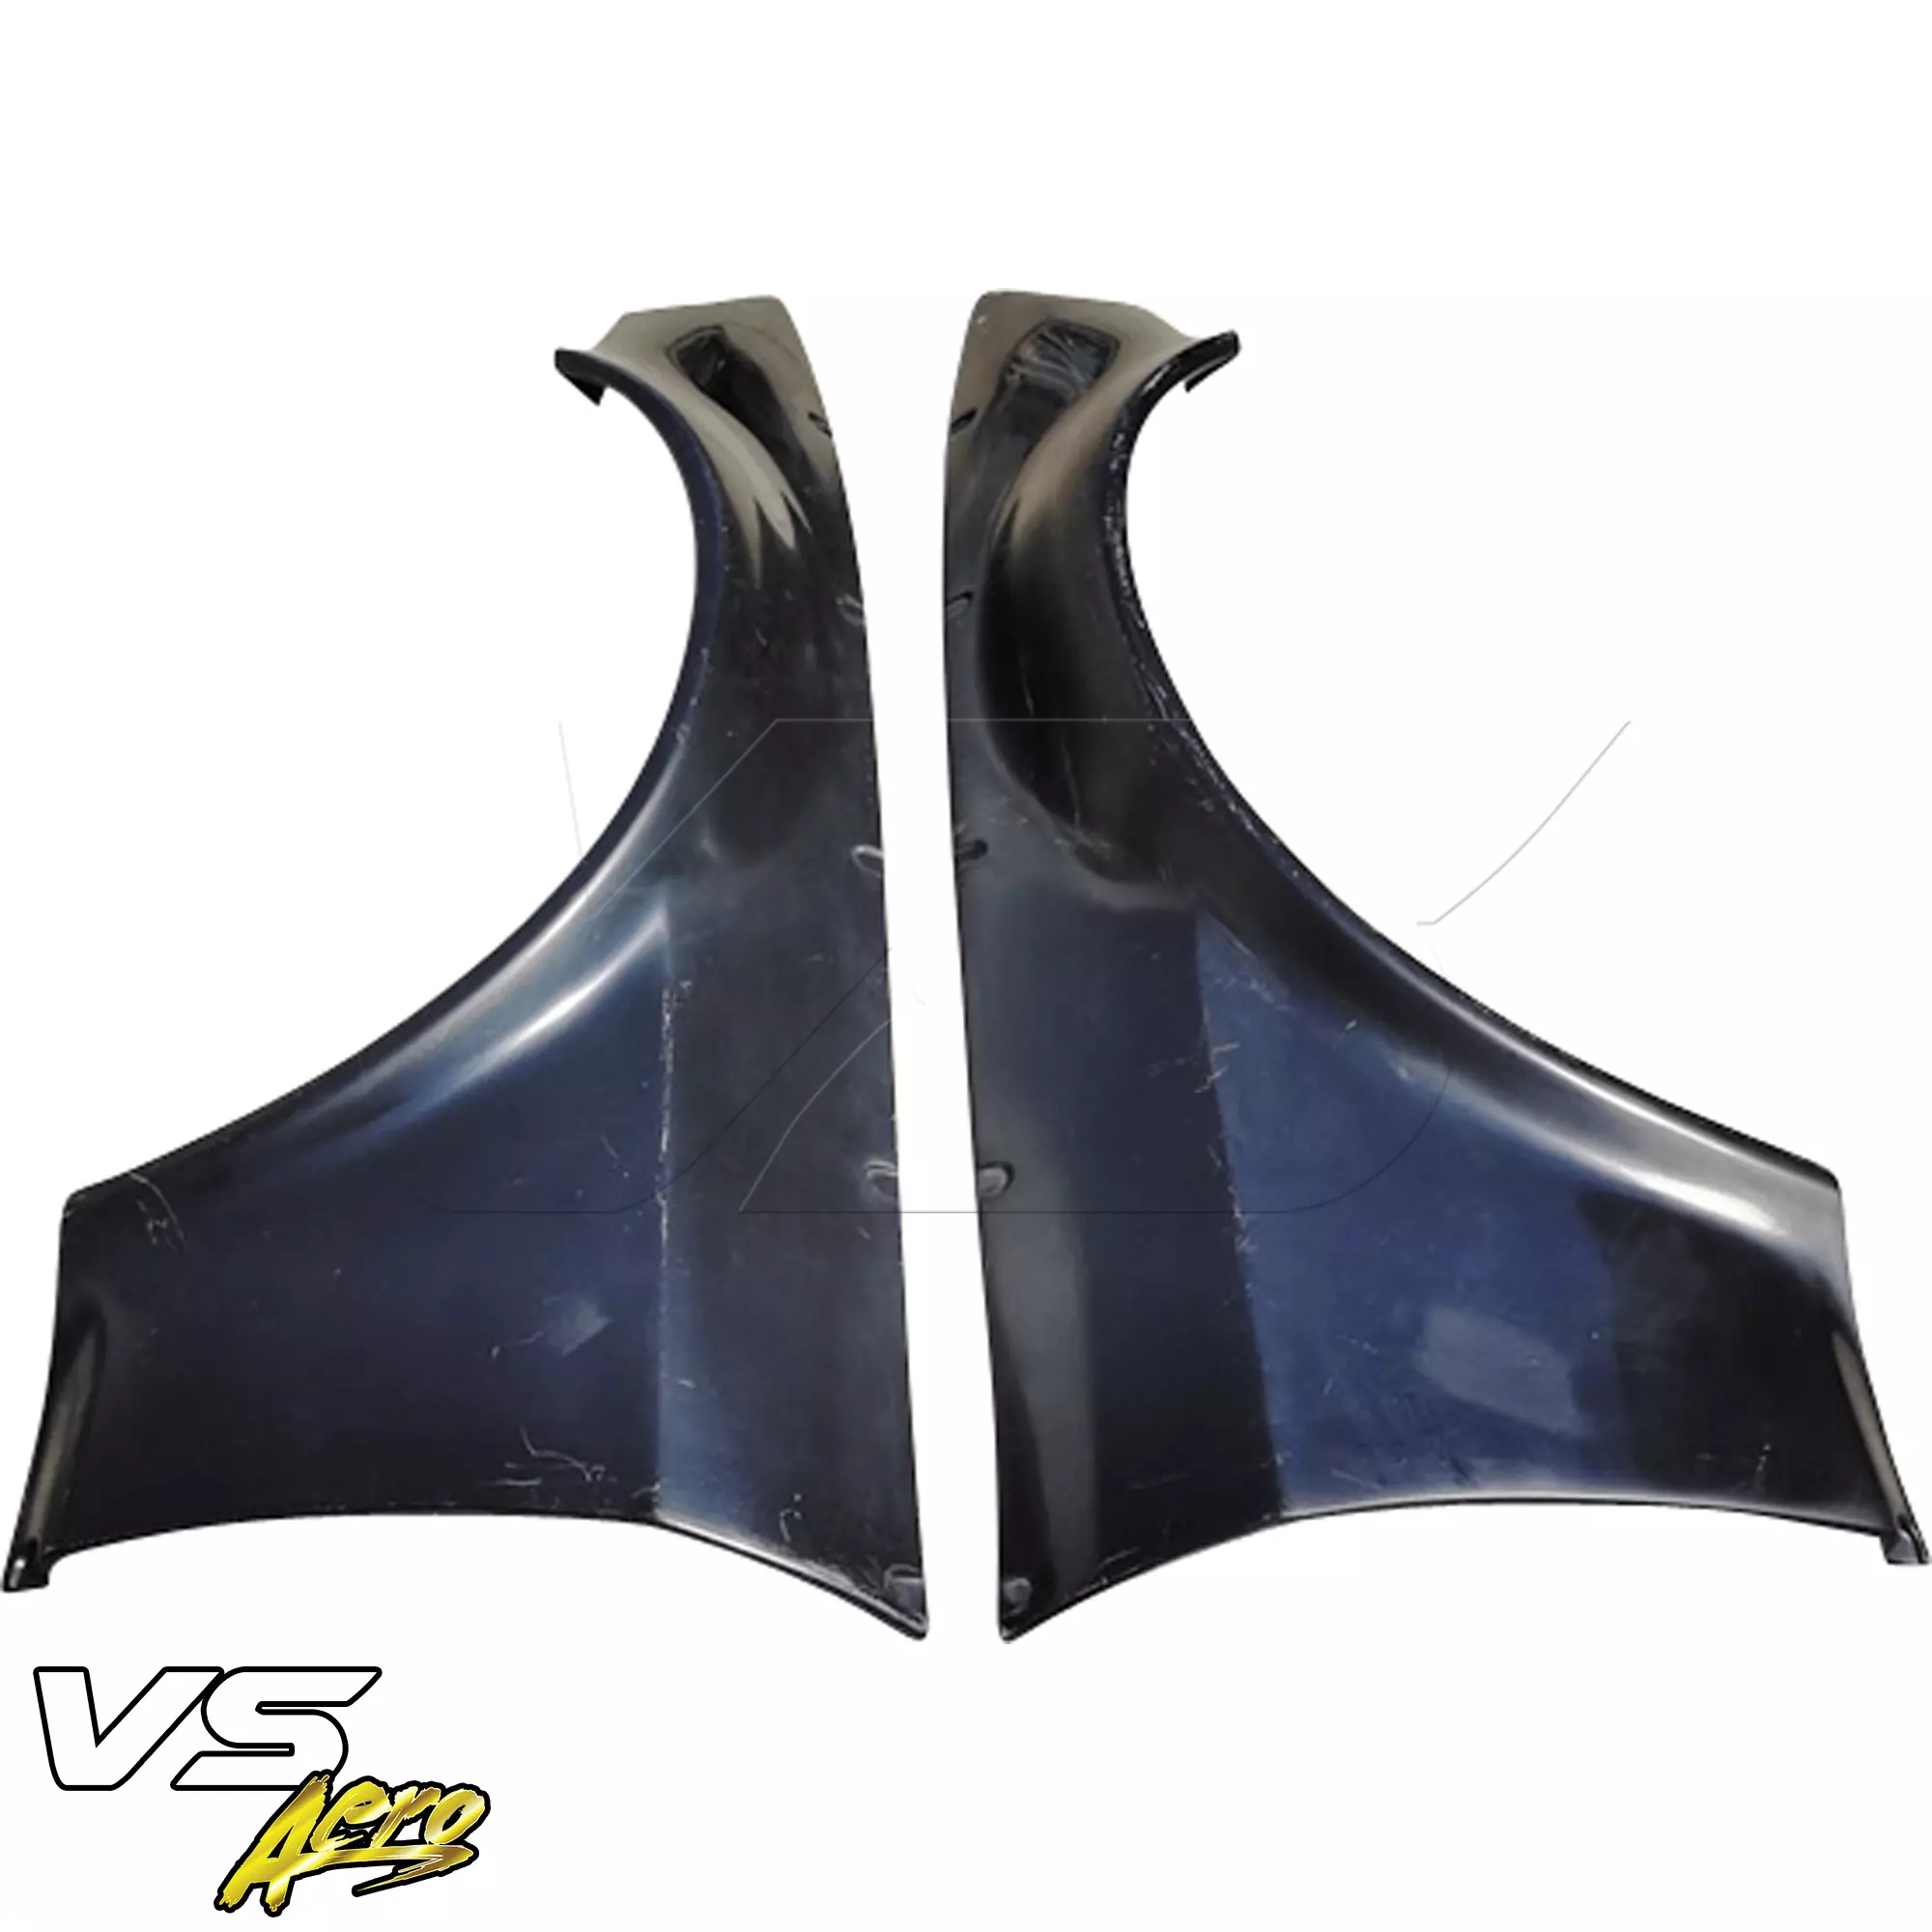 VSaero FRP TKYO Wide Body 65mm Fender Flares (front) > Nissan Skyline R33 1995-1998 > 2dr Coupe - Image 6